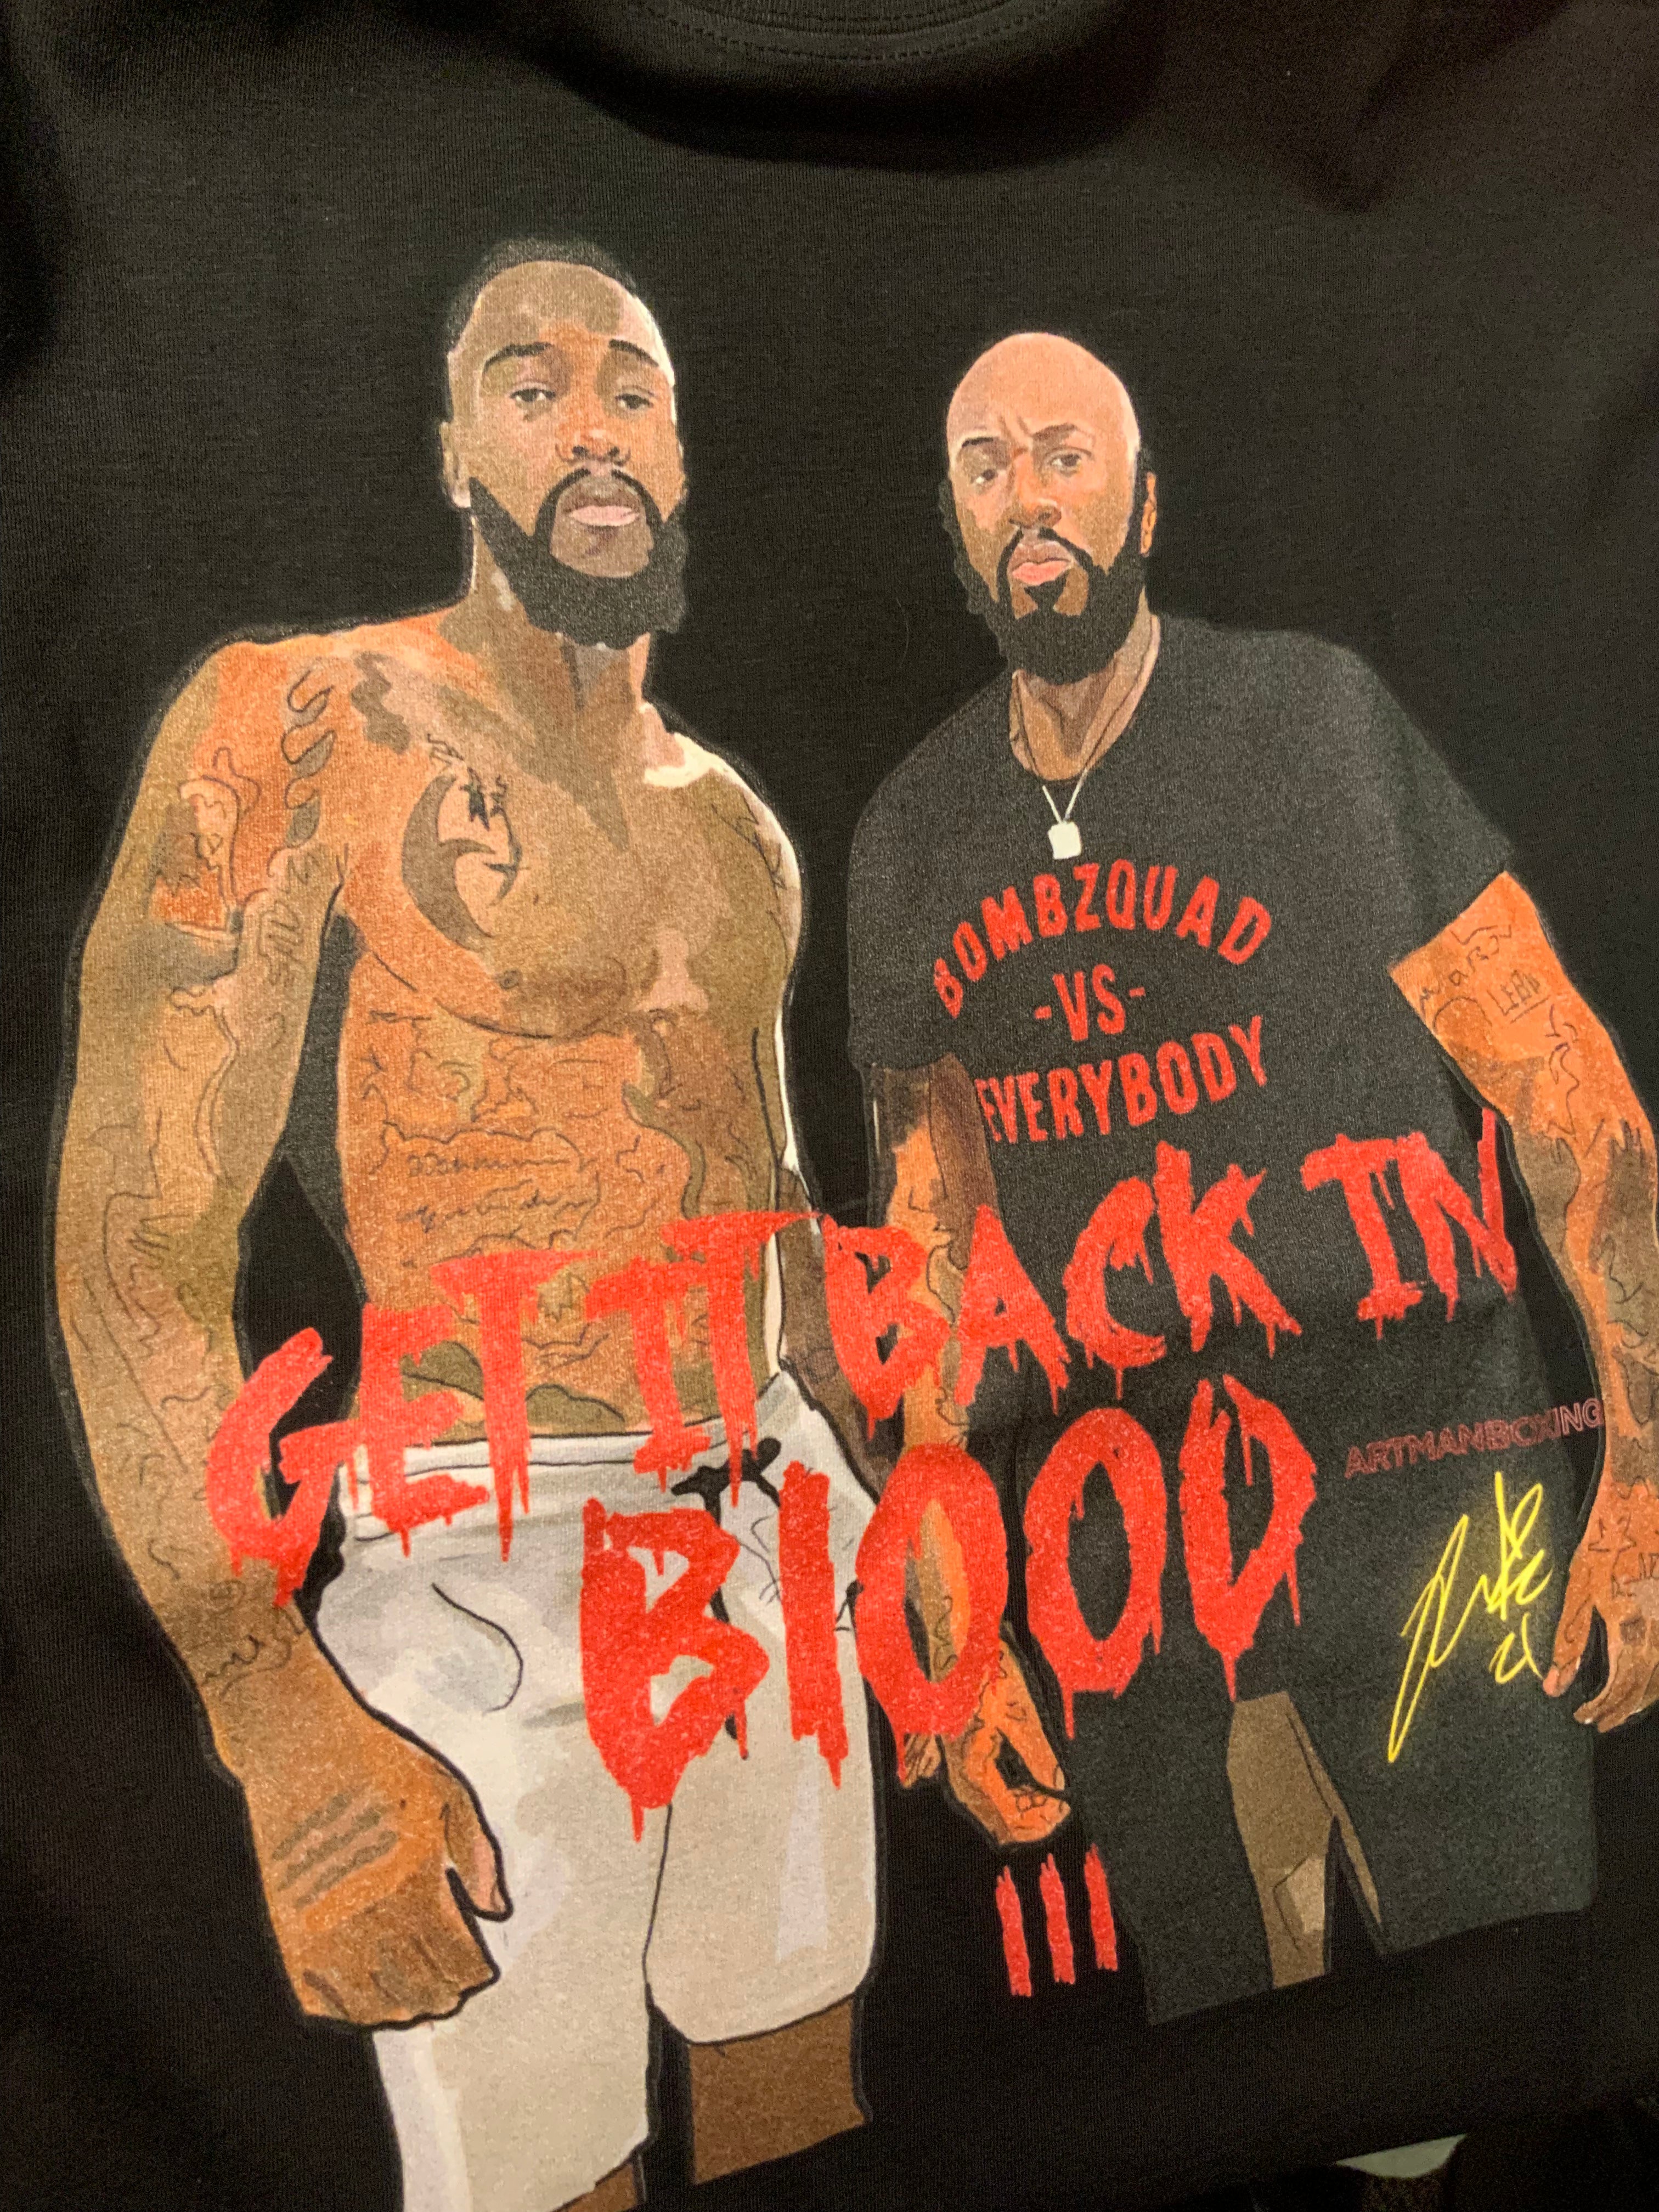 Back in Blood shirt